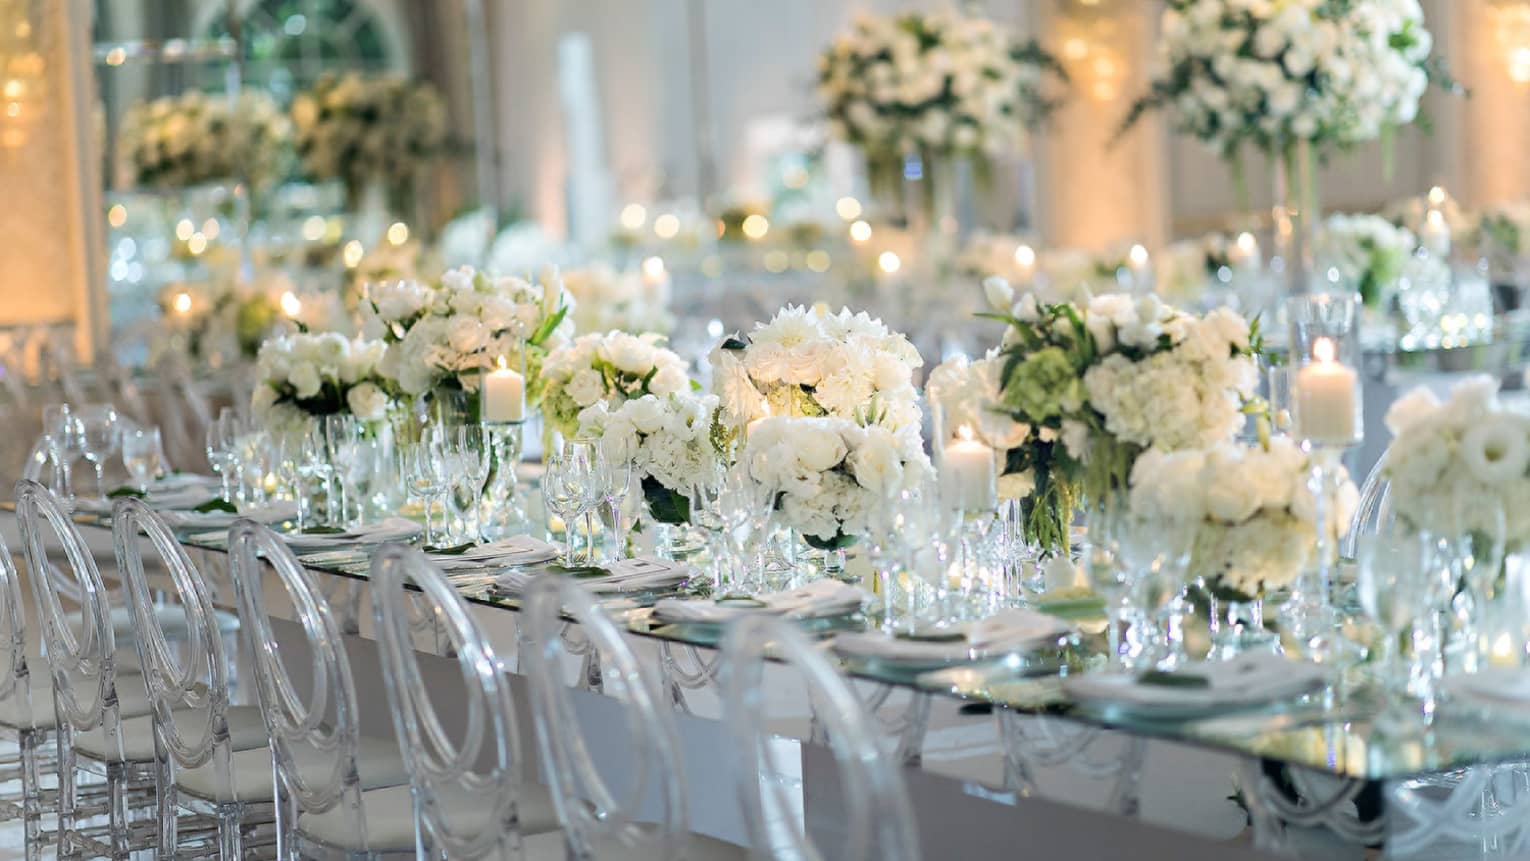 Long wedding dining table filled with white flowers, lined with transparent chairs